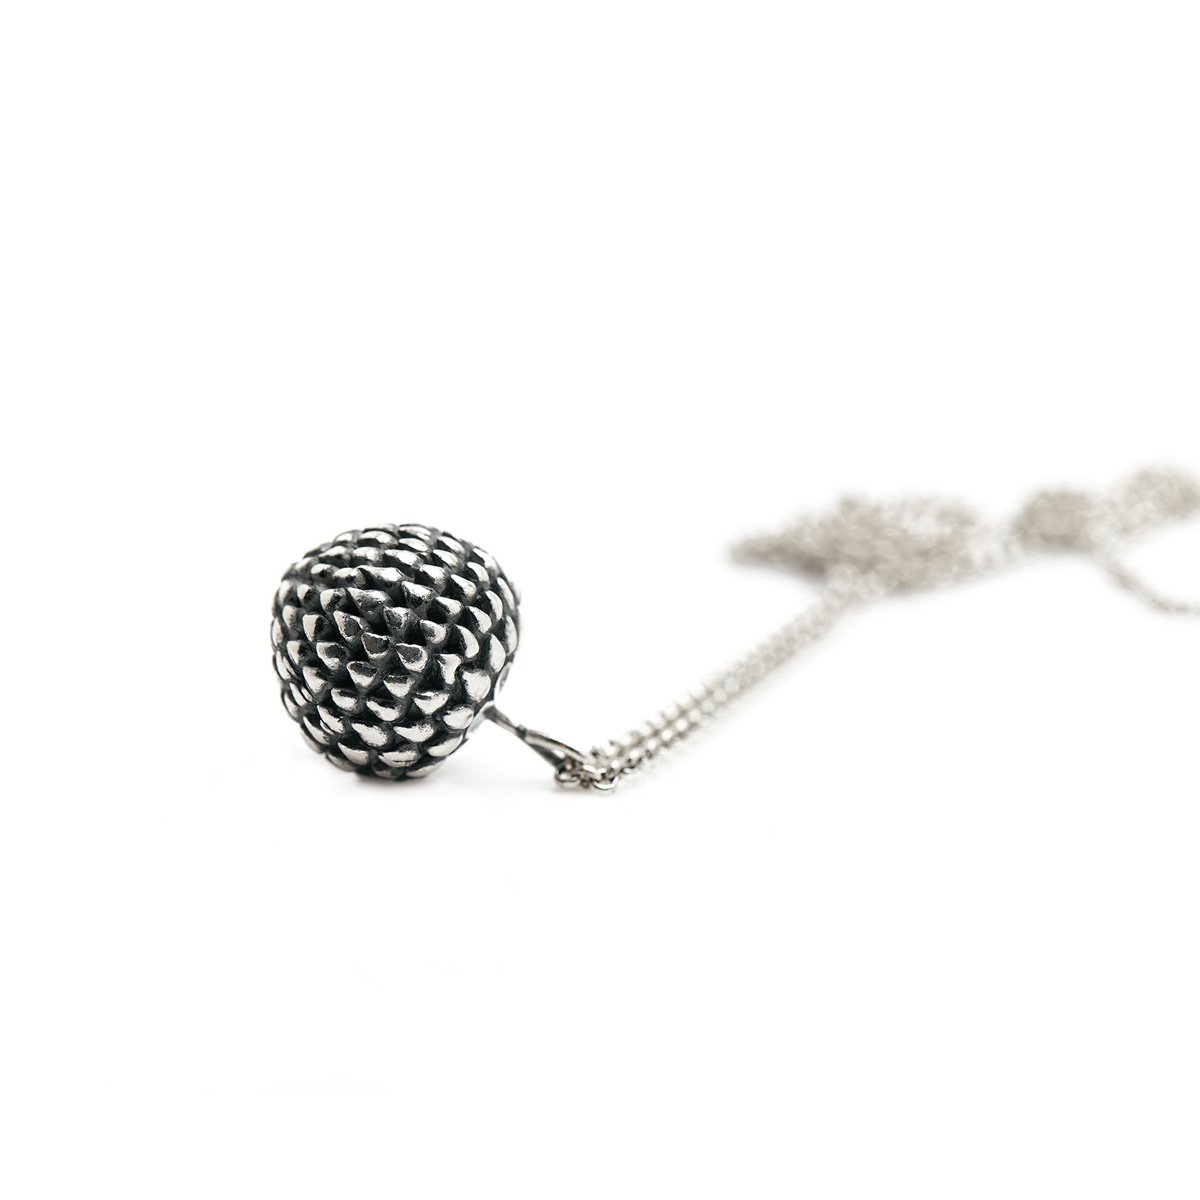 The chive flower necklace - oxidized Silver